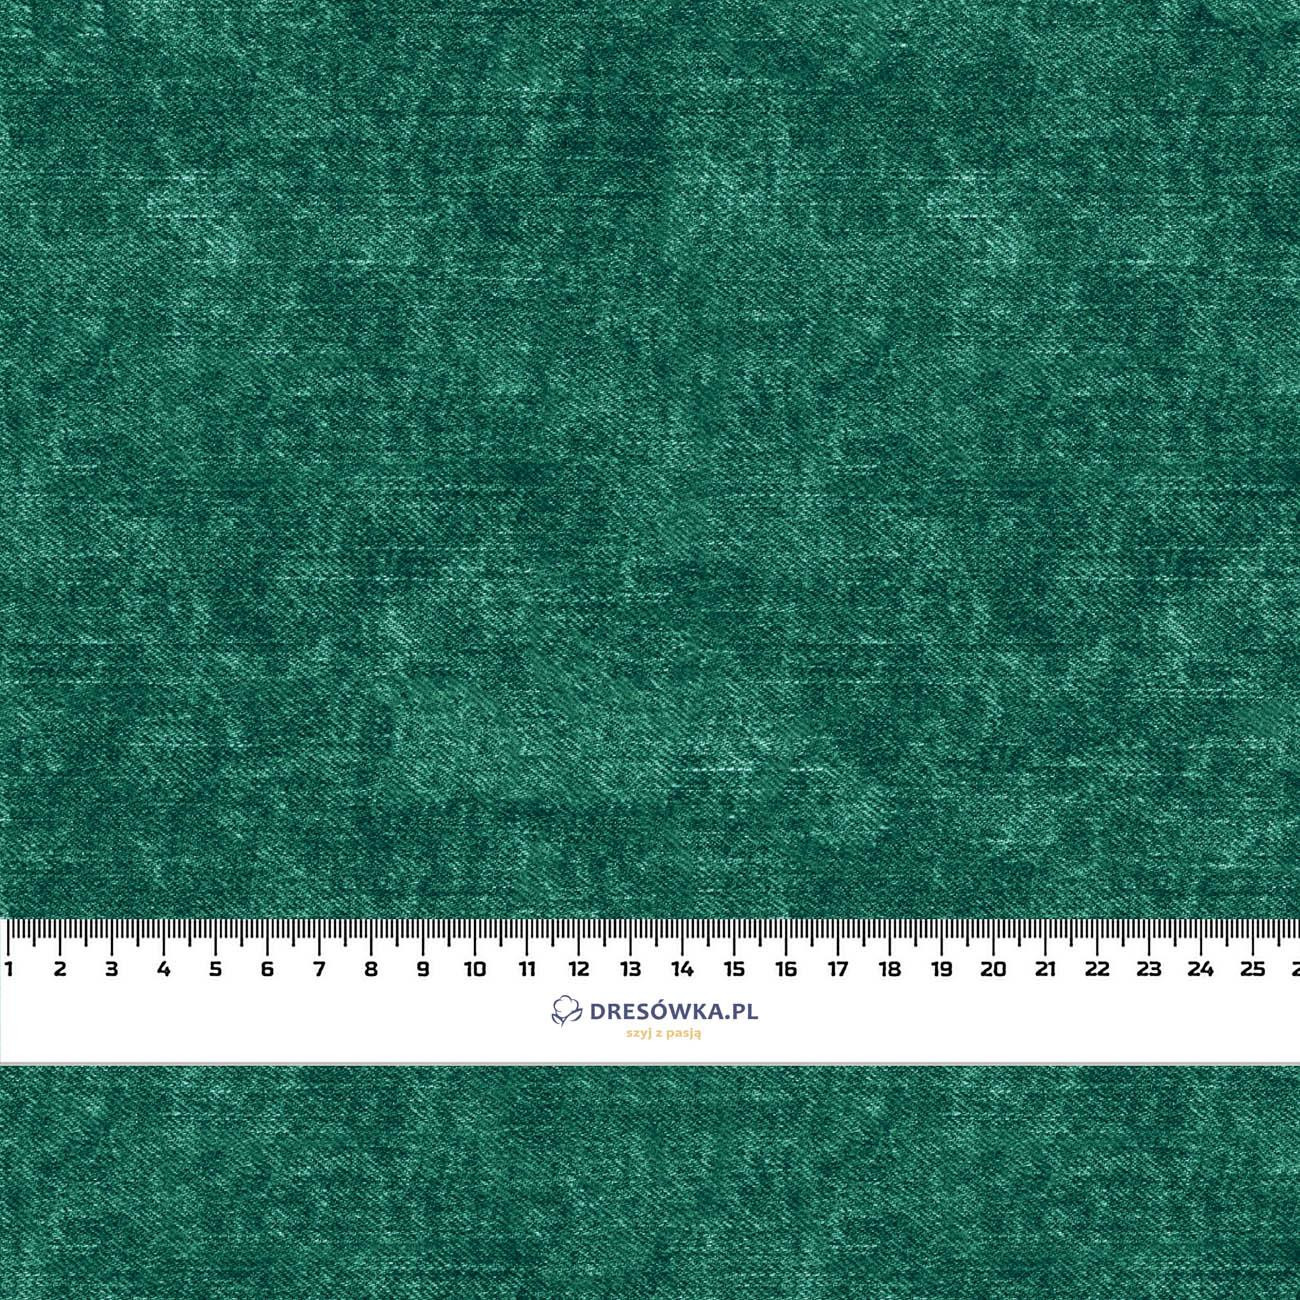 ACID WASH / BOTTLE GREEN - Woven Fabric for tablecloths